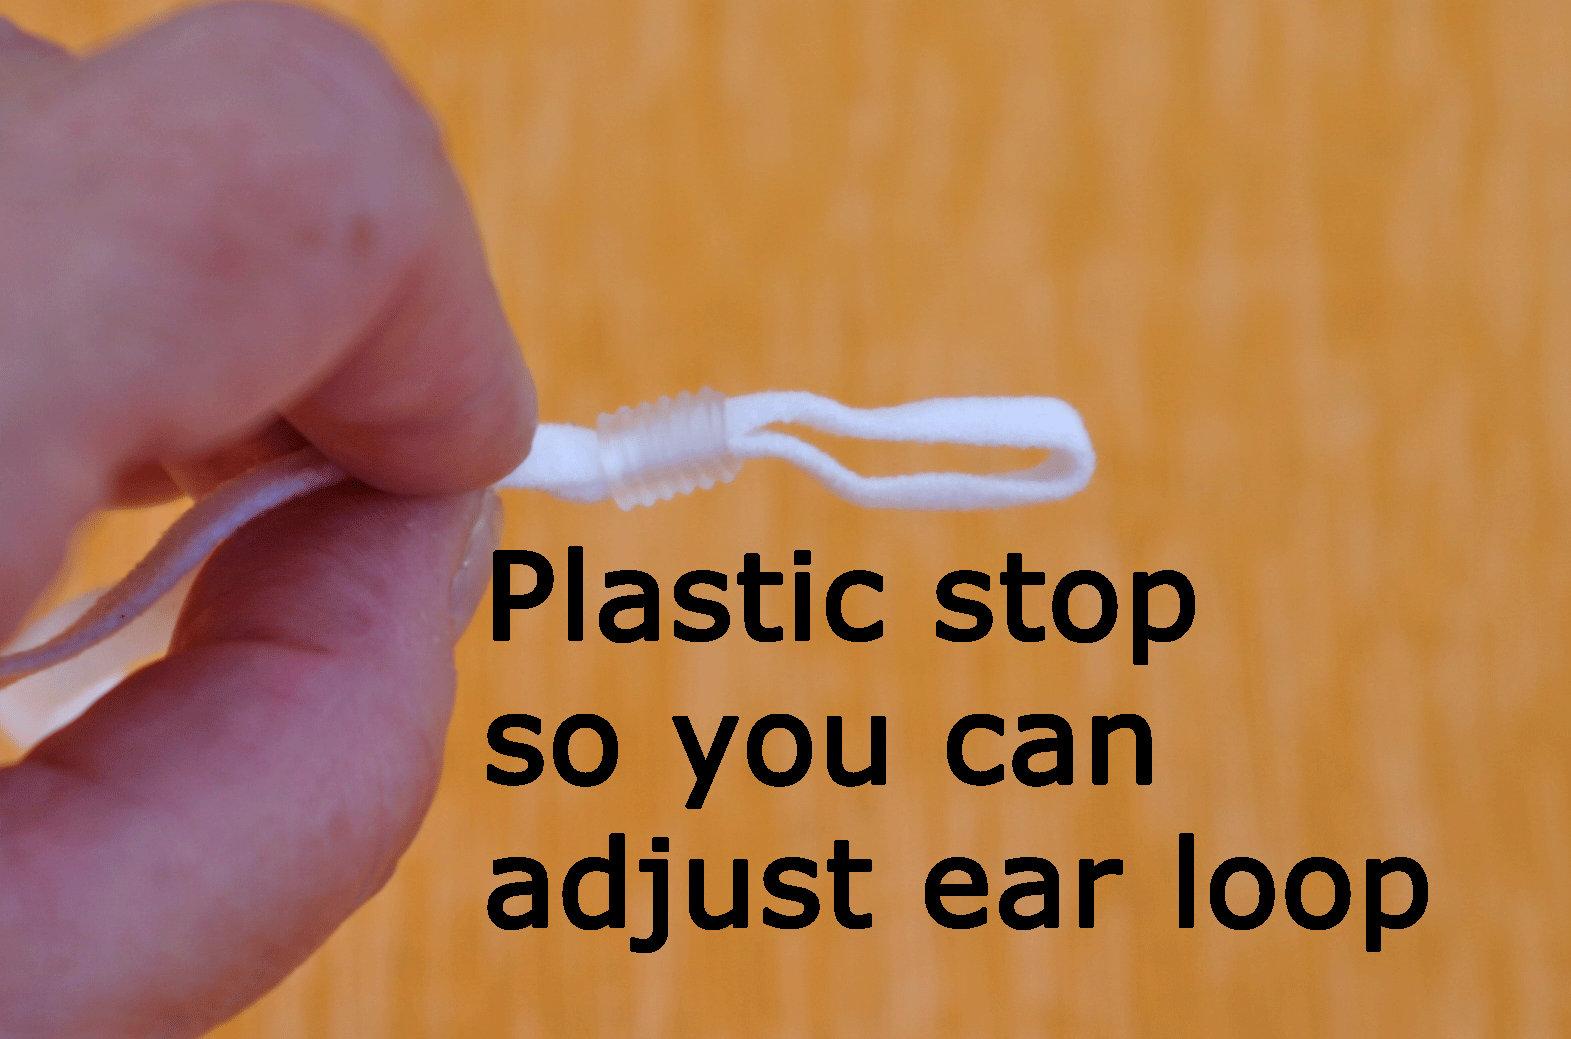 Ear loops have silicone adjusters